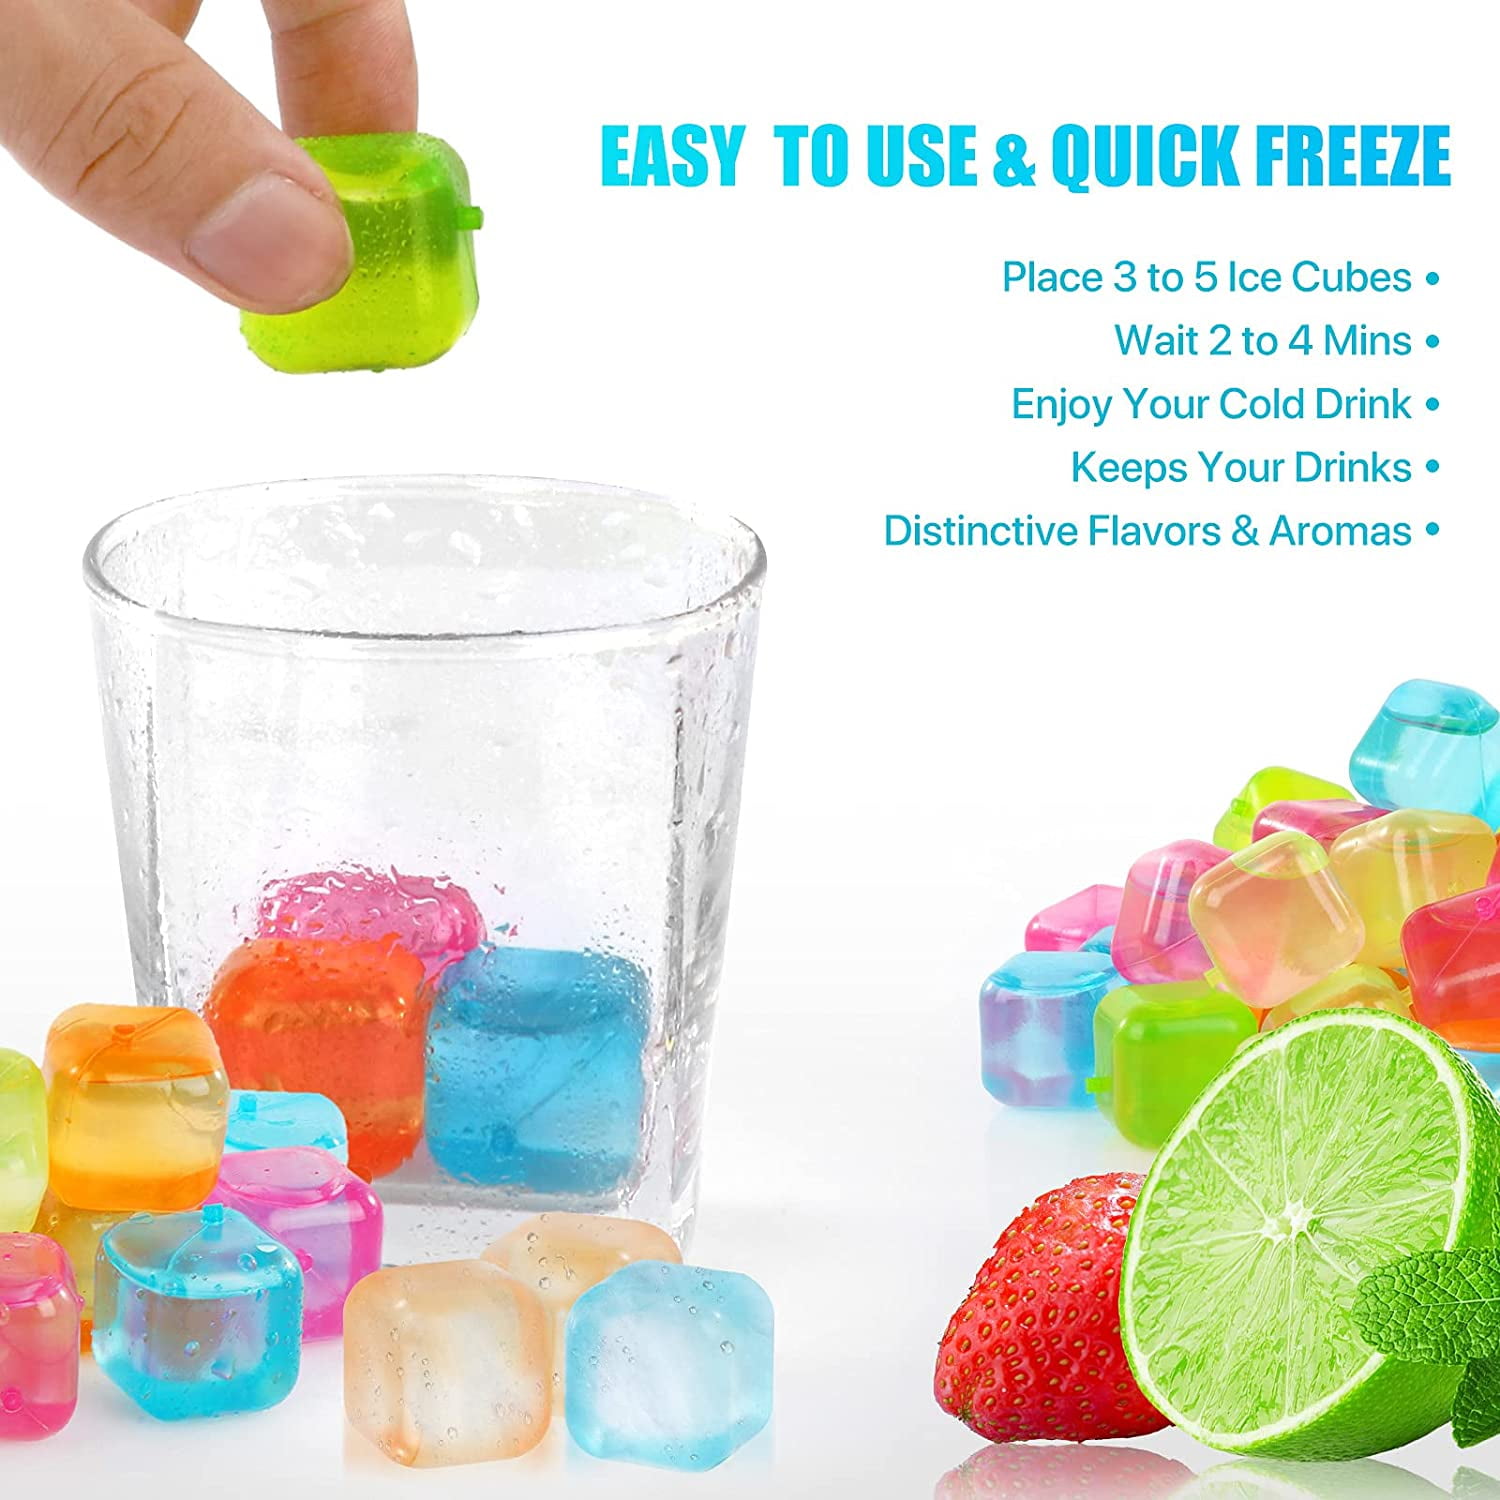 Extra Large Reusable Ice Cubes (2.6” Sq.) - BPA Free Plastic - for Cold  Therapy Units, Drink Coolers, or Drink Dispensers. Stay cold Longer. 6-Pack